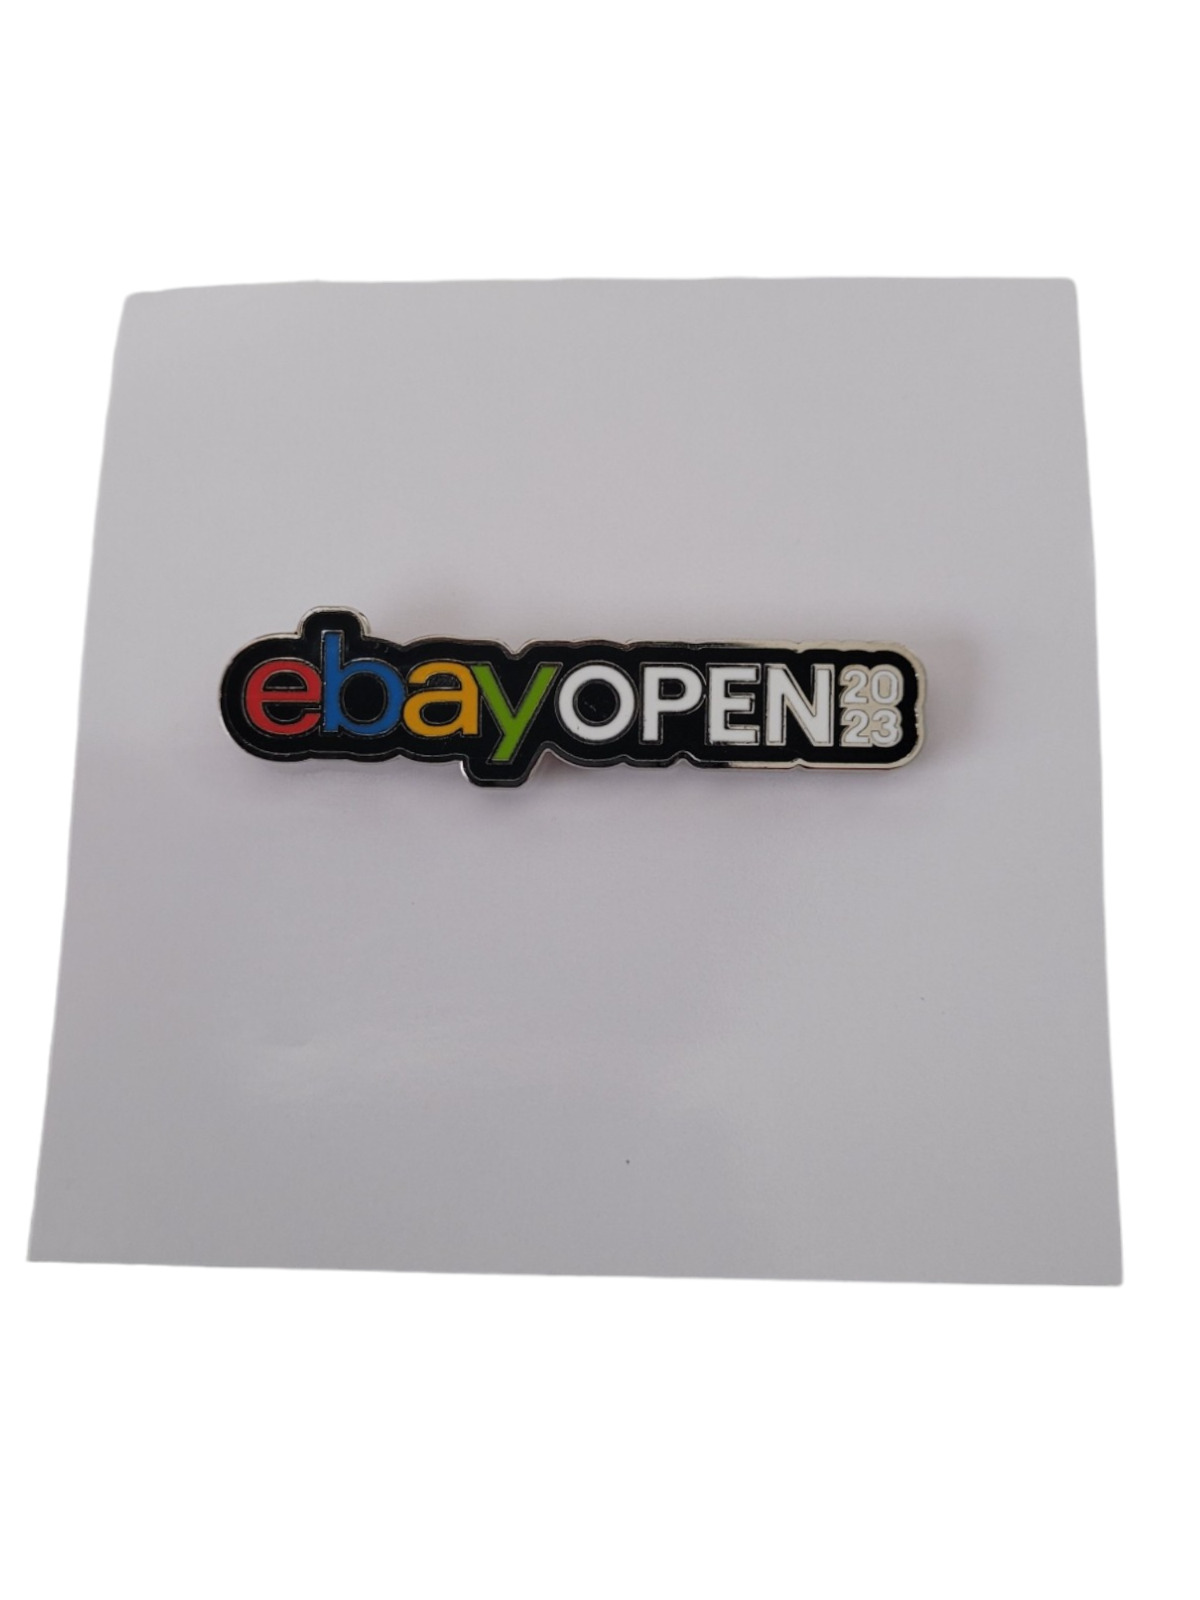 New Ebay Open 2023 2 Inch Collector Pin with Backing Board